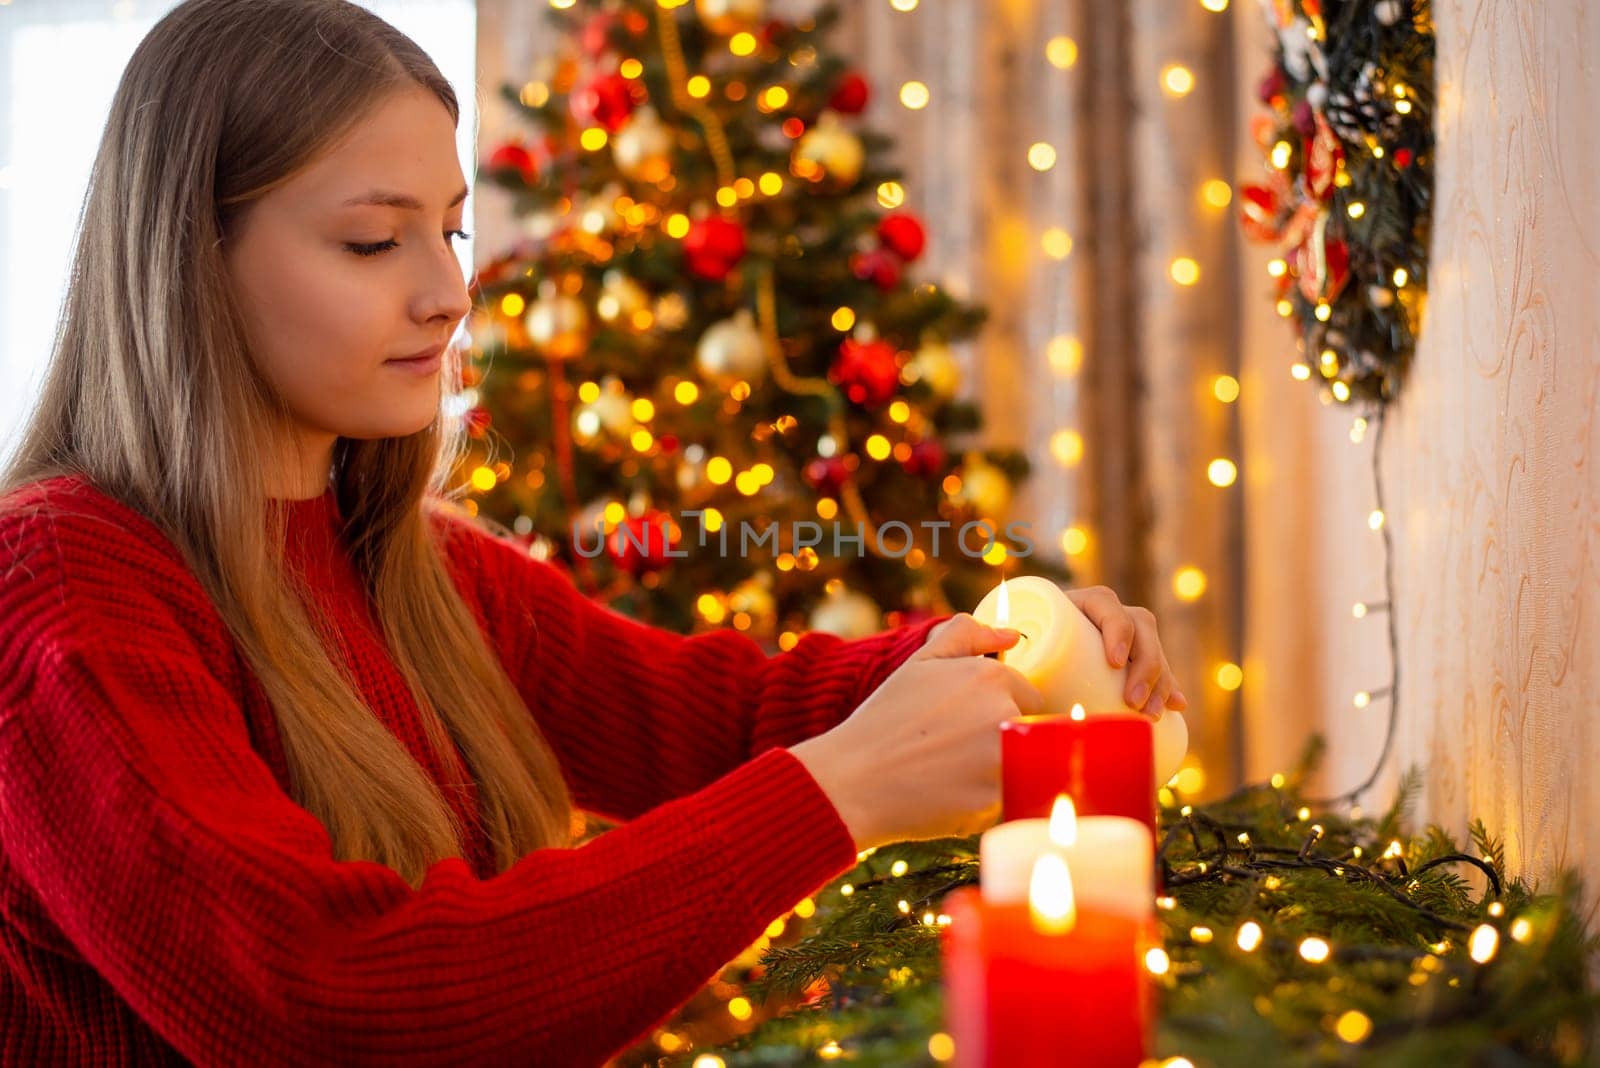 Young blond girl in red sweater igniting candles in decorated living room